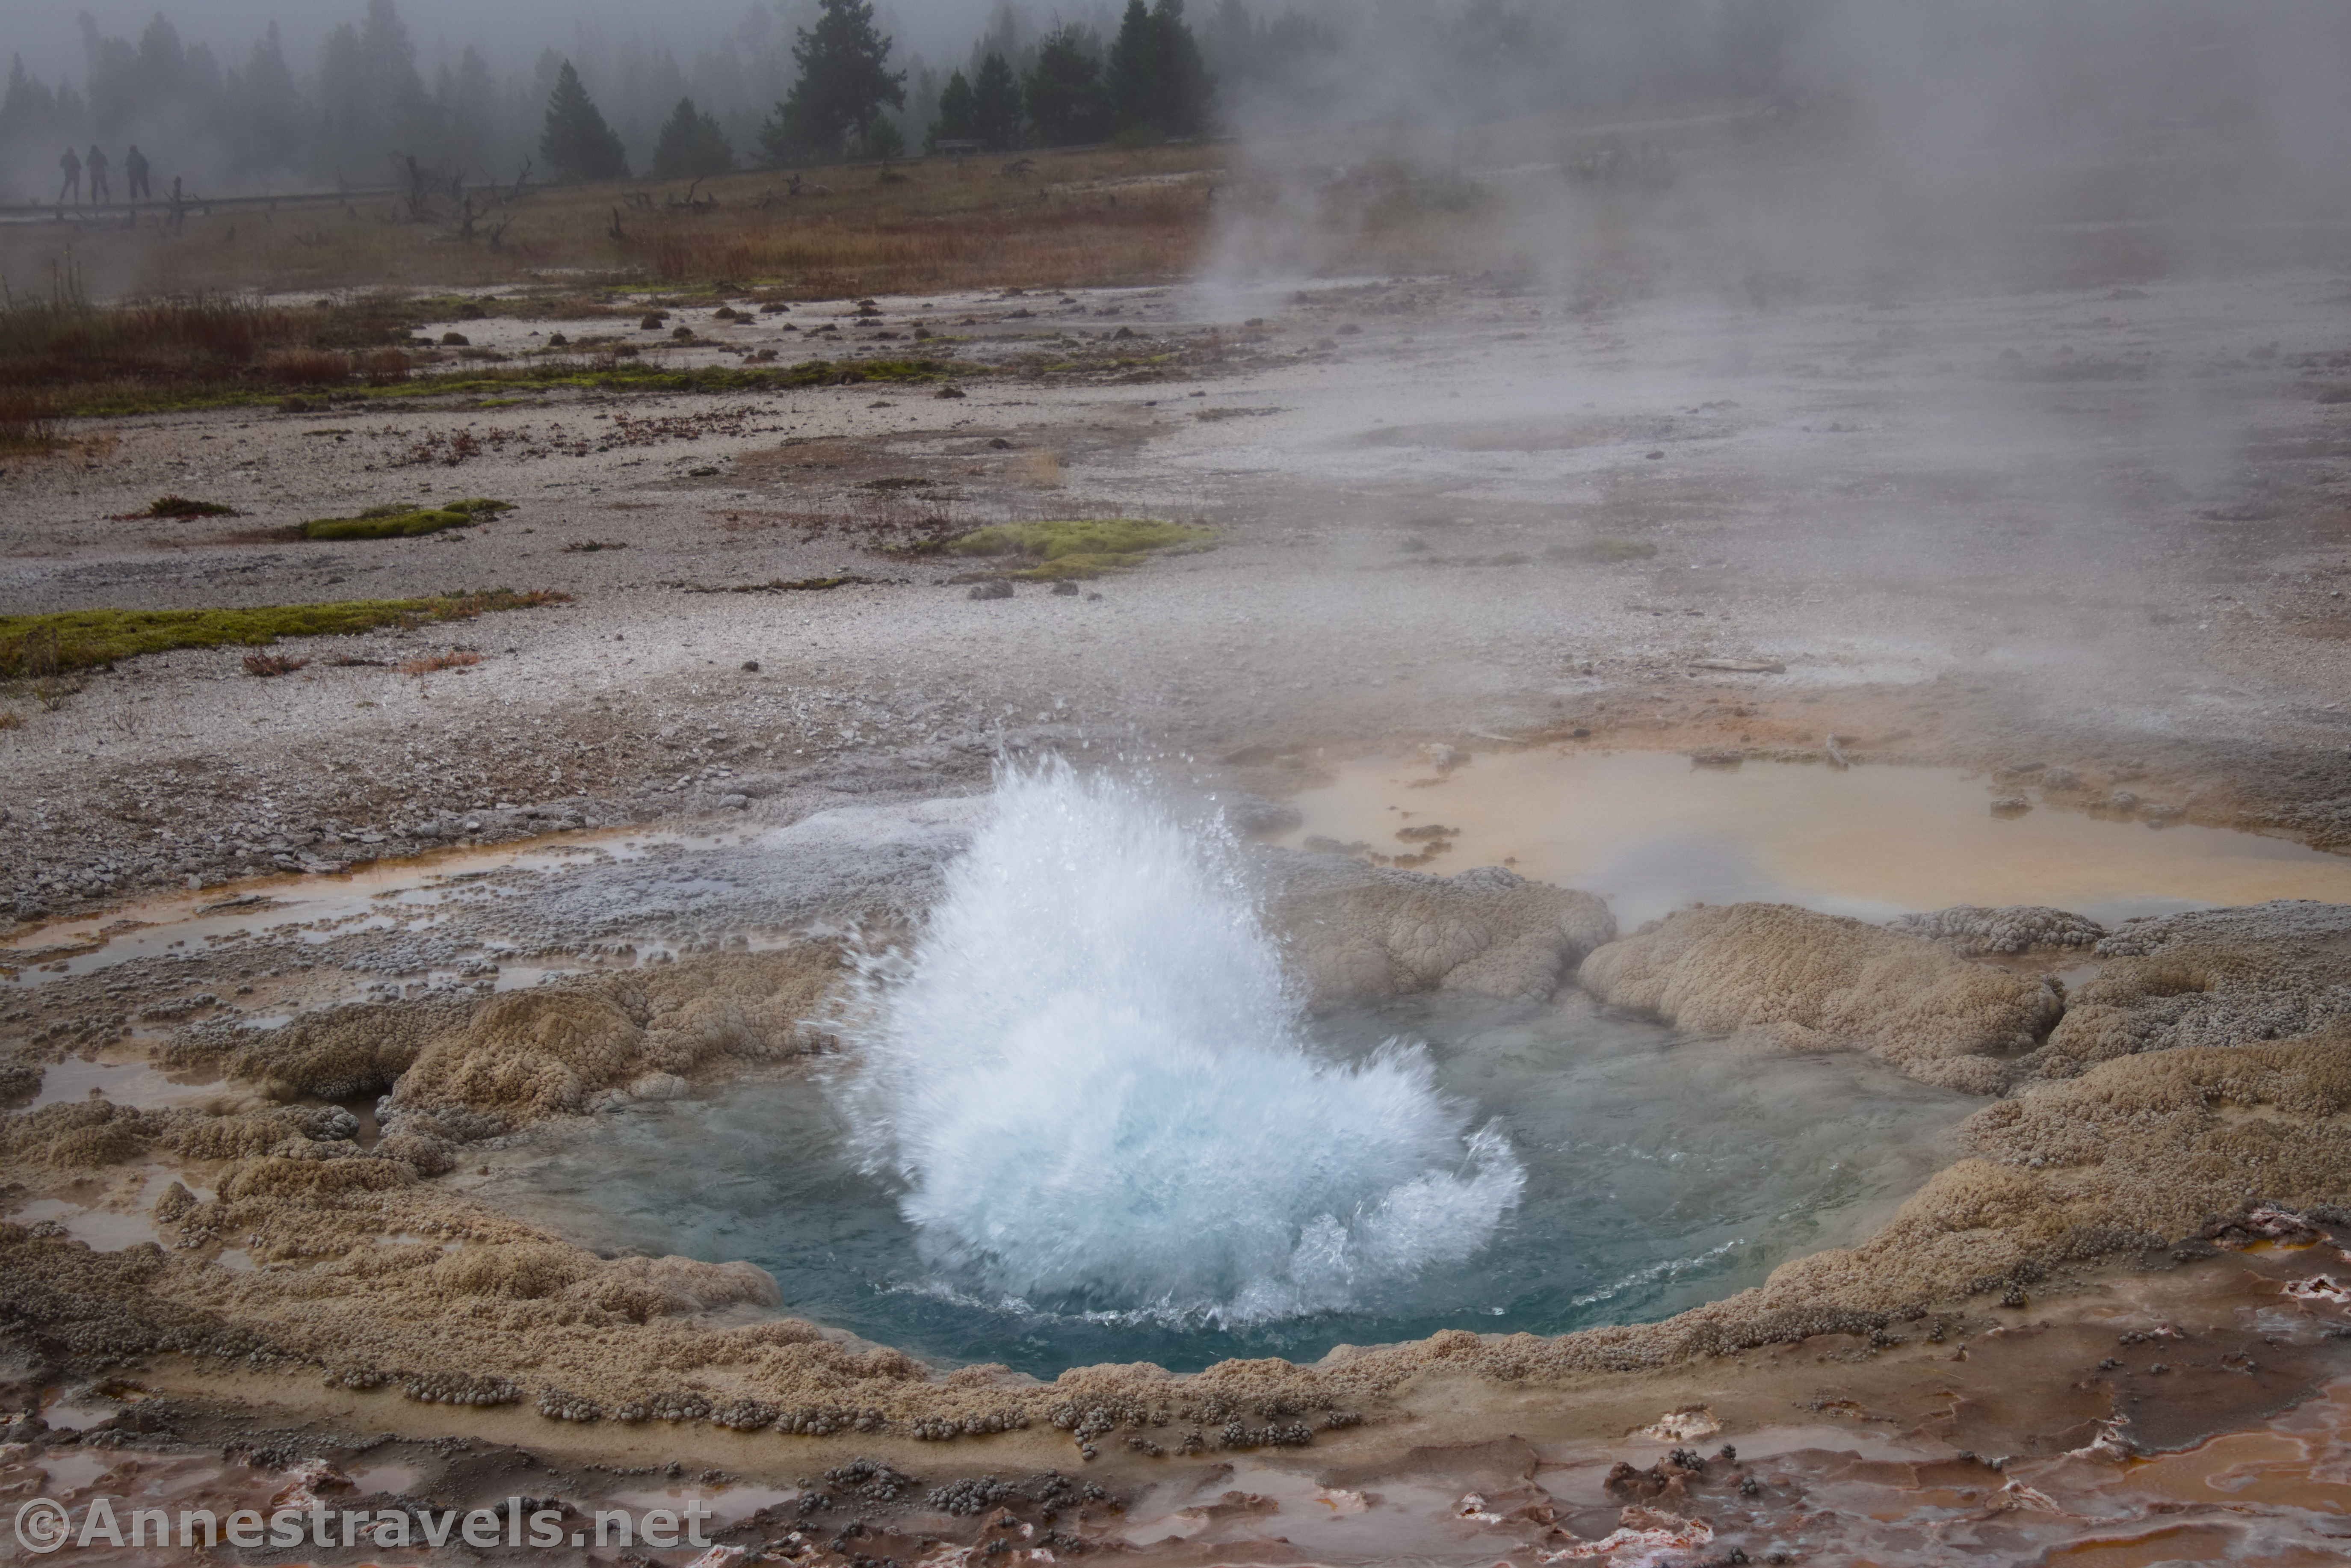 A small geyser (maybe Mustard Spring?) in Biscuit Geyser Basin, Yellowstone National Park, Wyoming